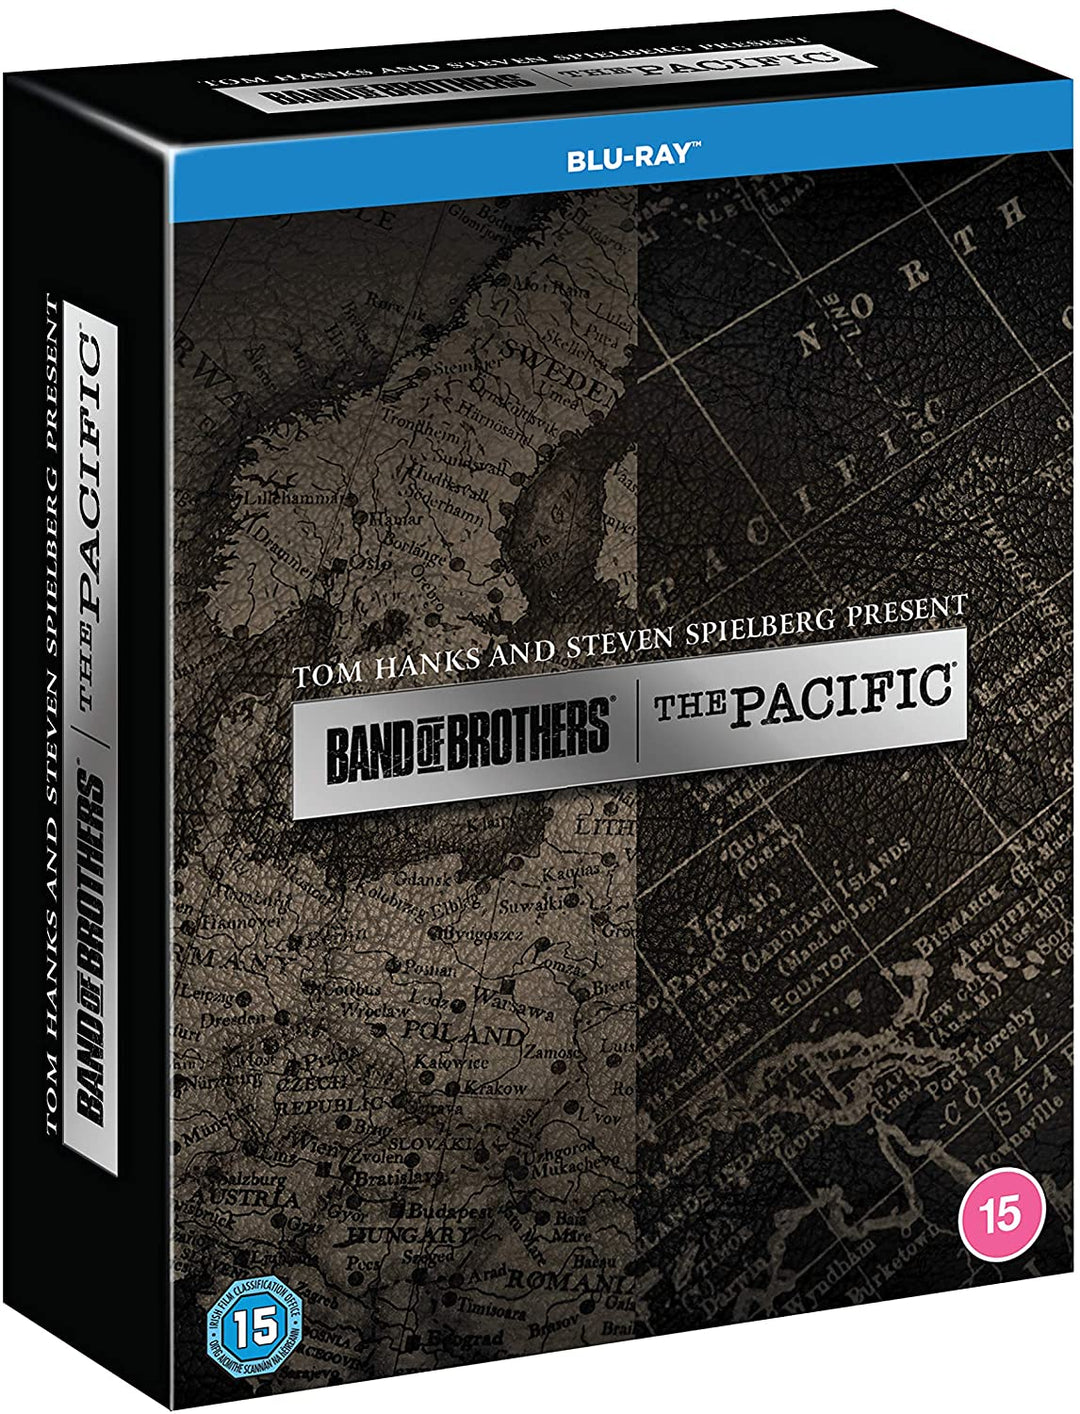 The Pacific / Band Of Brothers [2010] – War [Blu-ray]